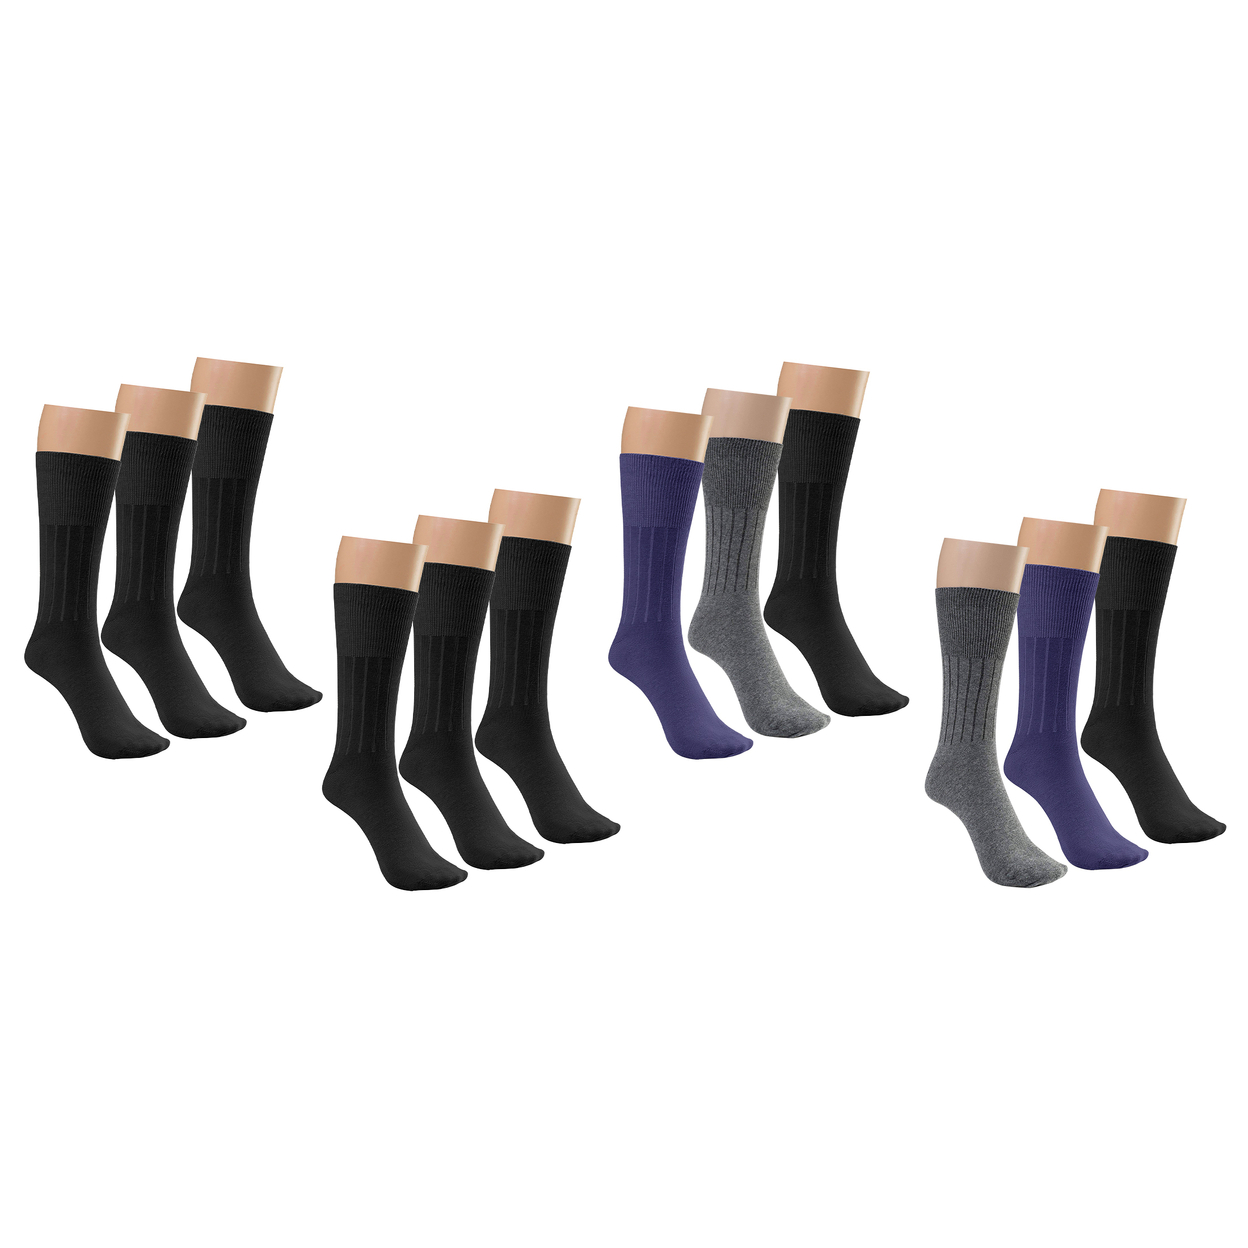 9-Pairs: Physician Approved Non-Binding Diabetic Circulatory Comfortable Moisture Wicking Dress Socks - Assorted